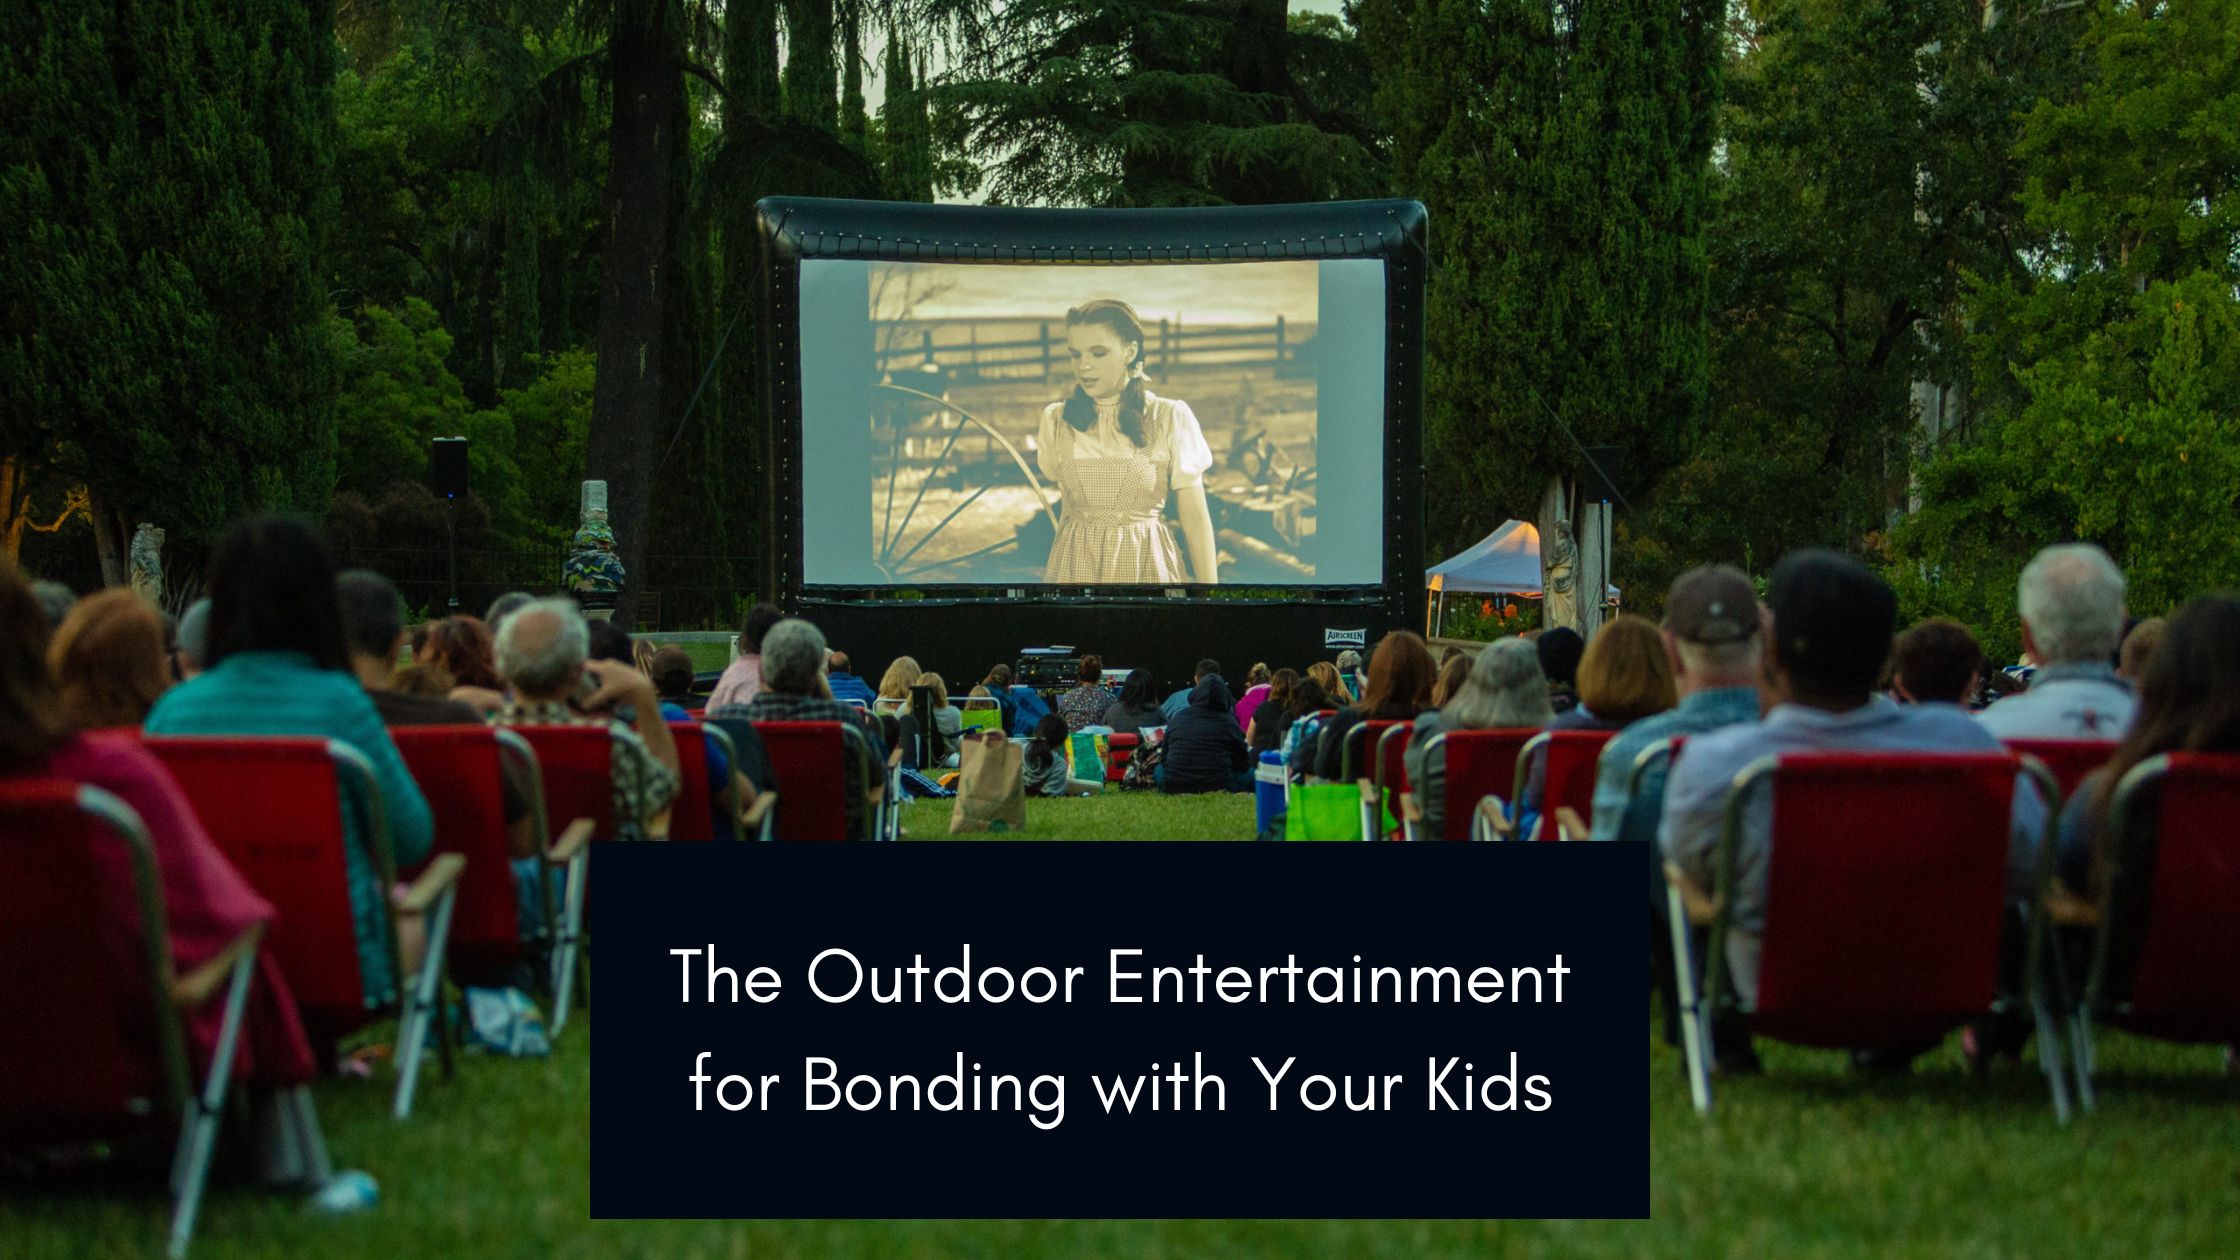 The Outdoor Entertainment for Bonding with Your Kids